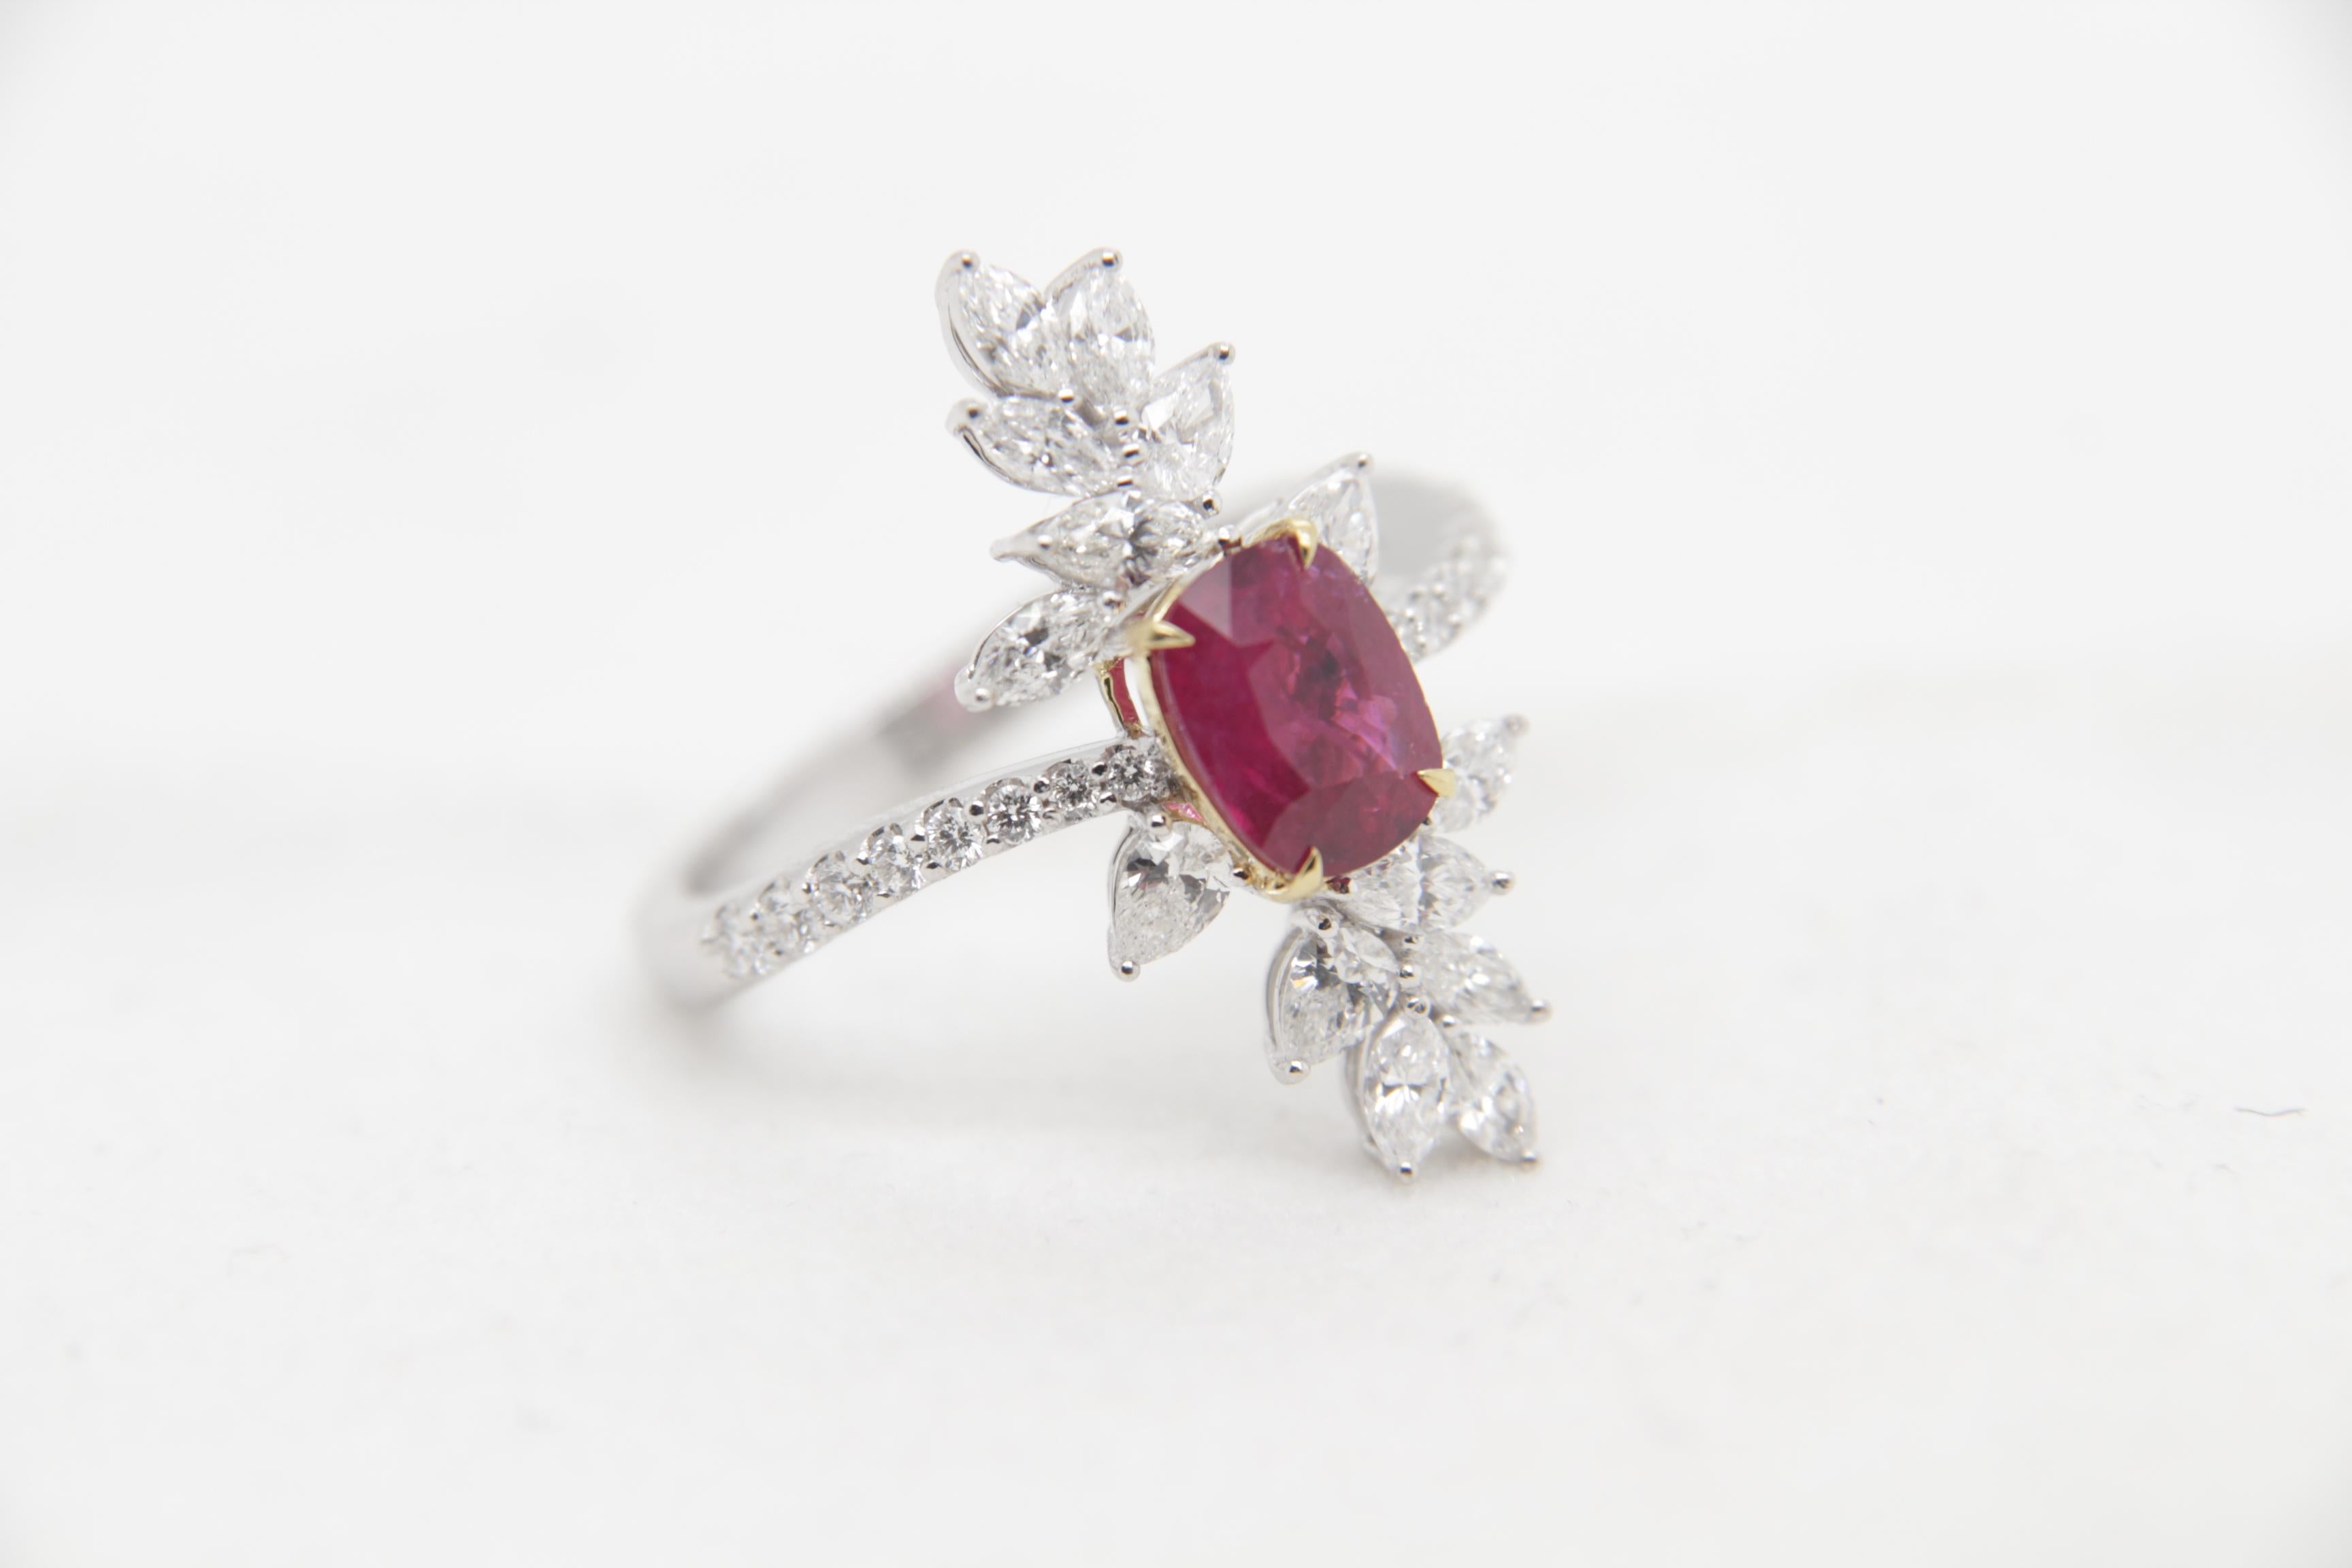 A brand new 1.13 carat Burmese ruby ring mounted with diamonds in 18 Karat gold. The ruby weighs 1.13 carat and is certified by Gem Research Swisslab (GRS) as natural, no heat, and 'Pigeon Blood'. The total diamond weight is 1.08 carat and the total